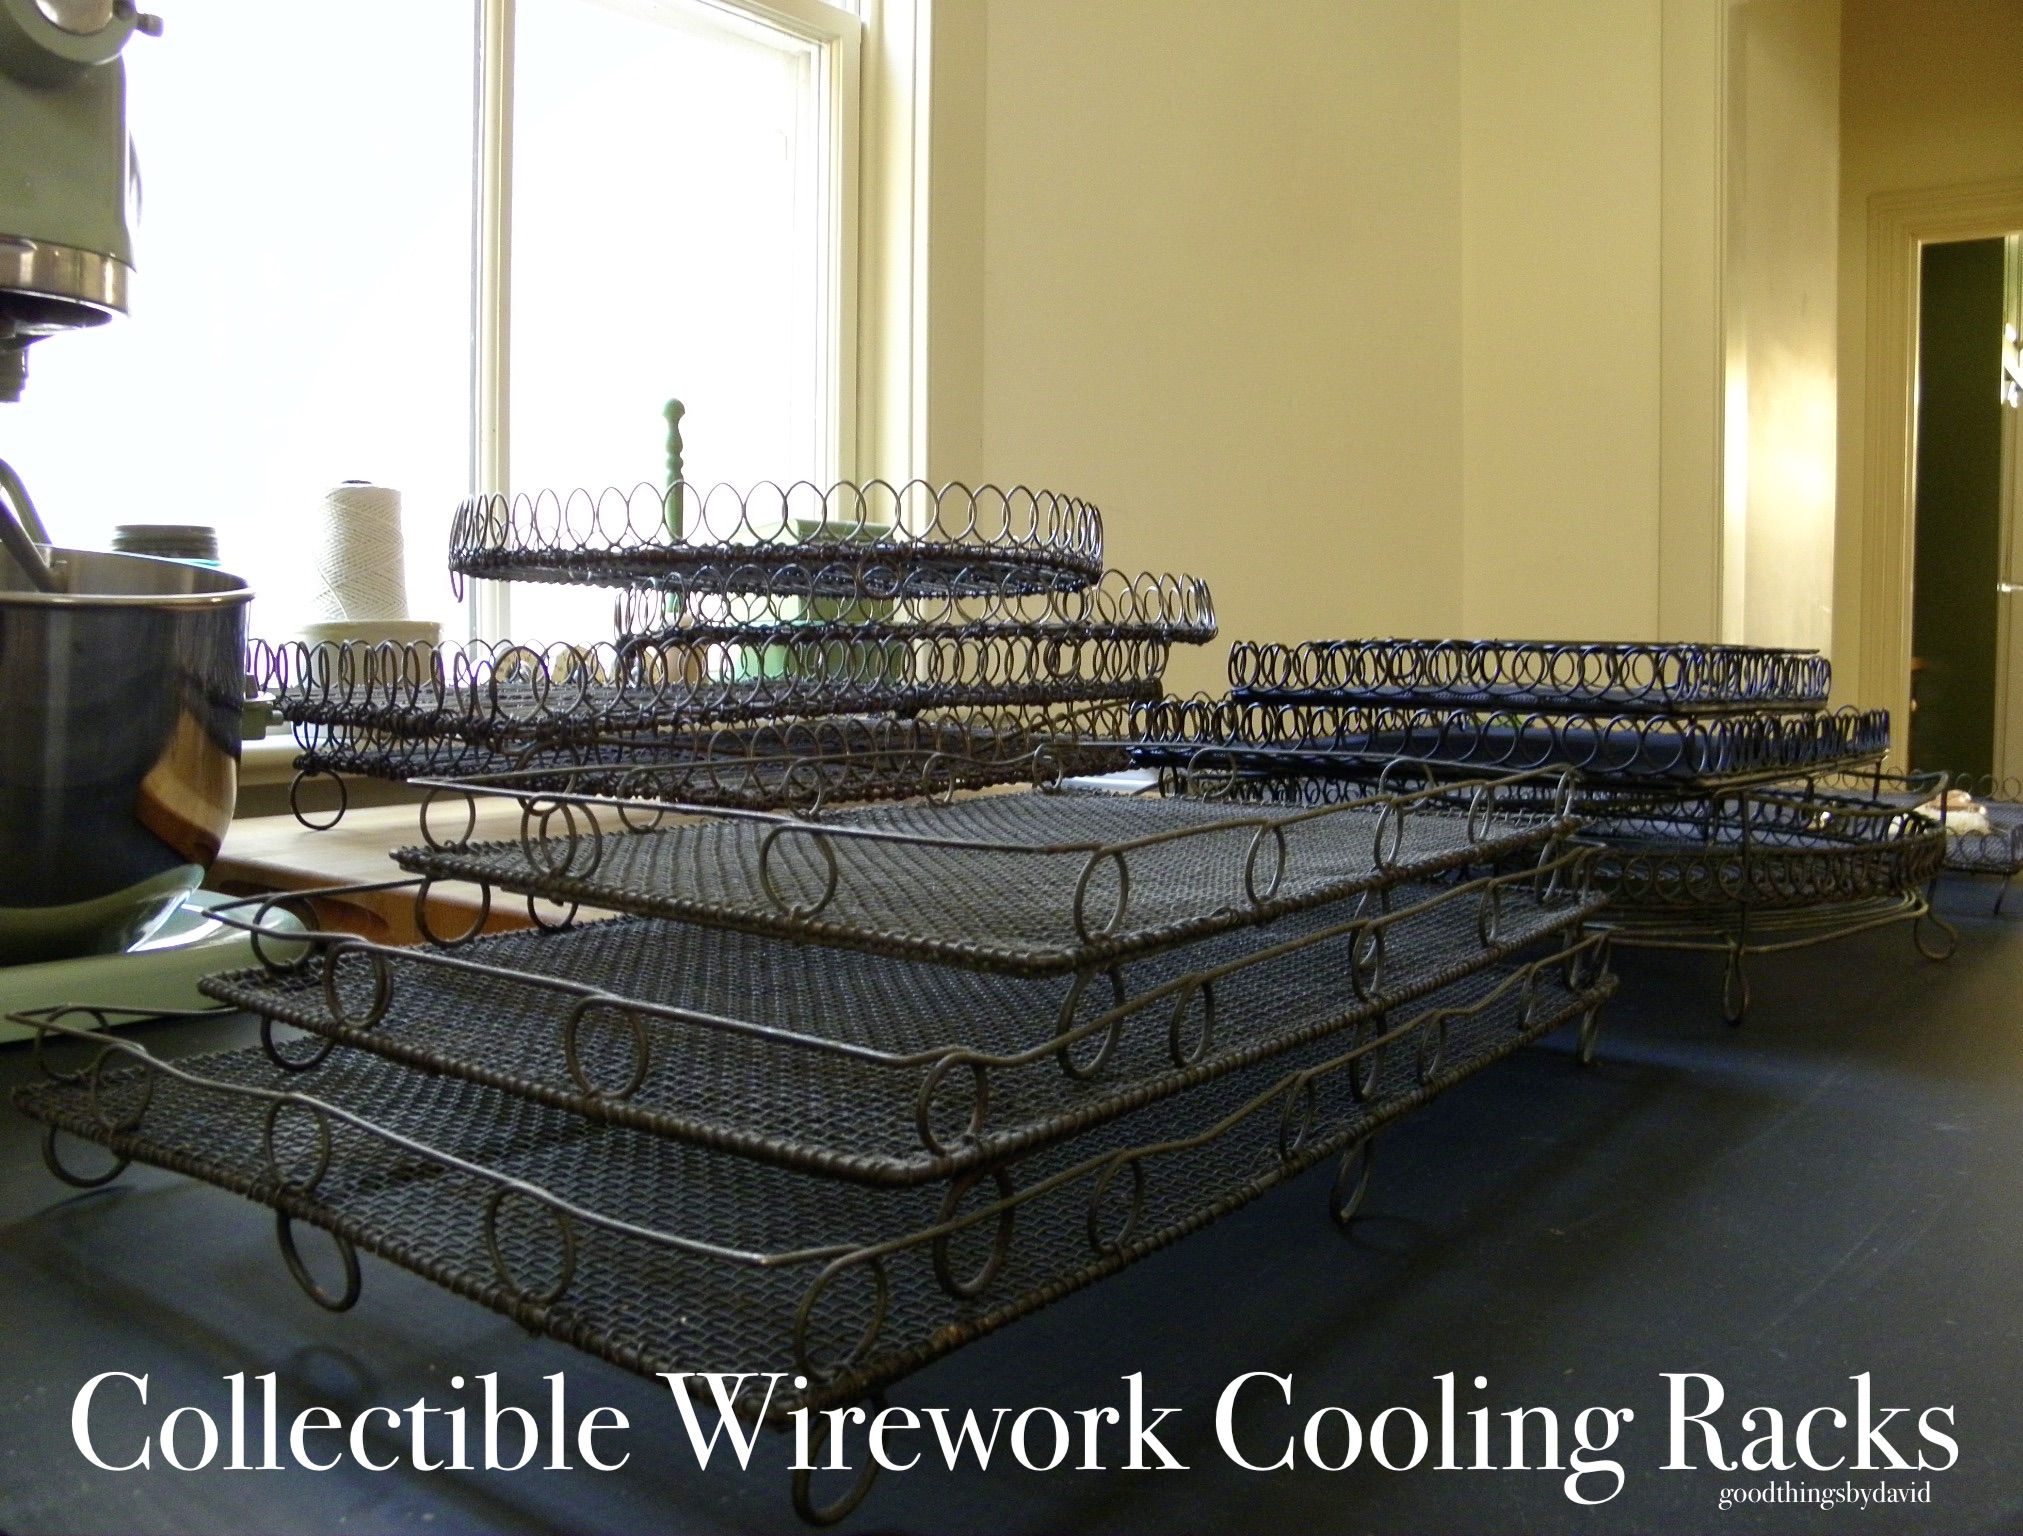 Collectible Wirework Cooling Racks